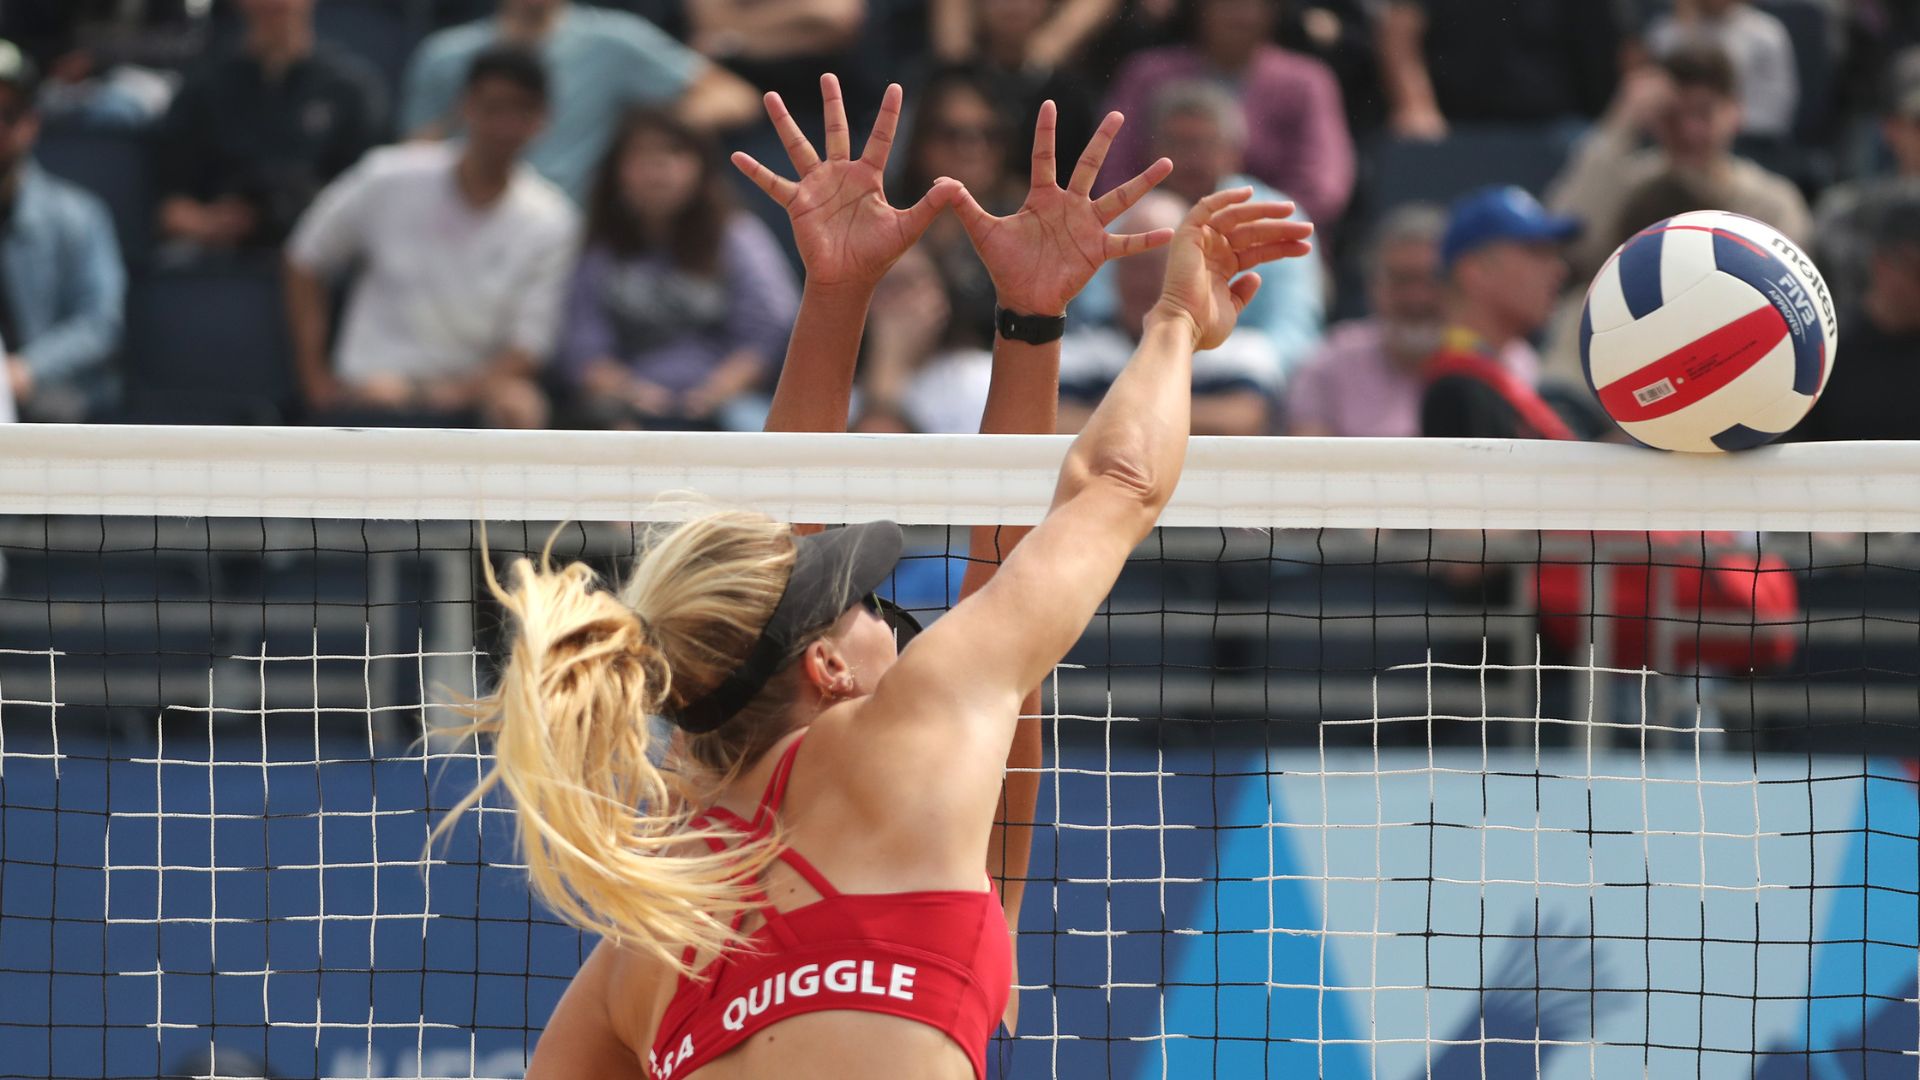 A strong entry in female's beach volleyball with Americans Quiggle and Murph